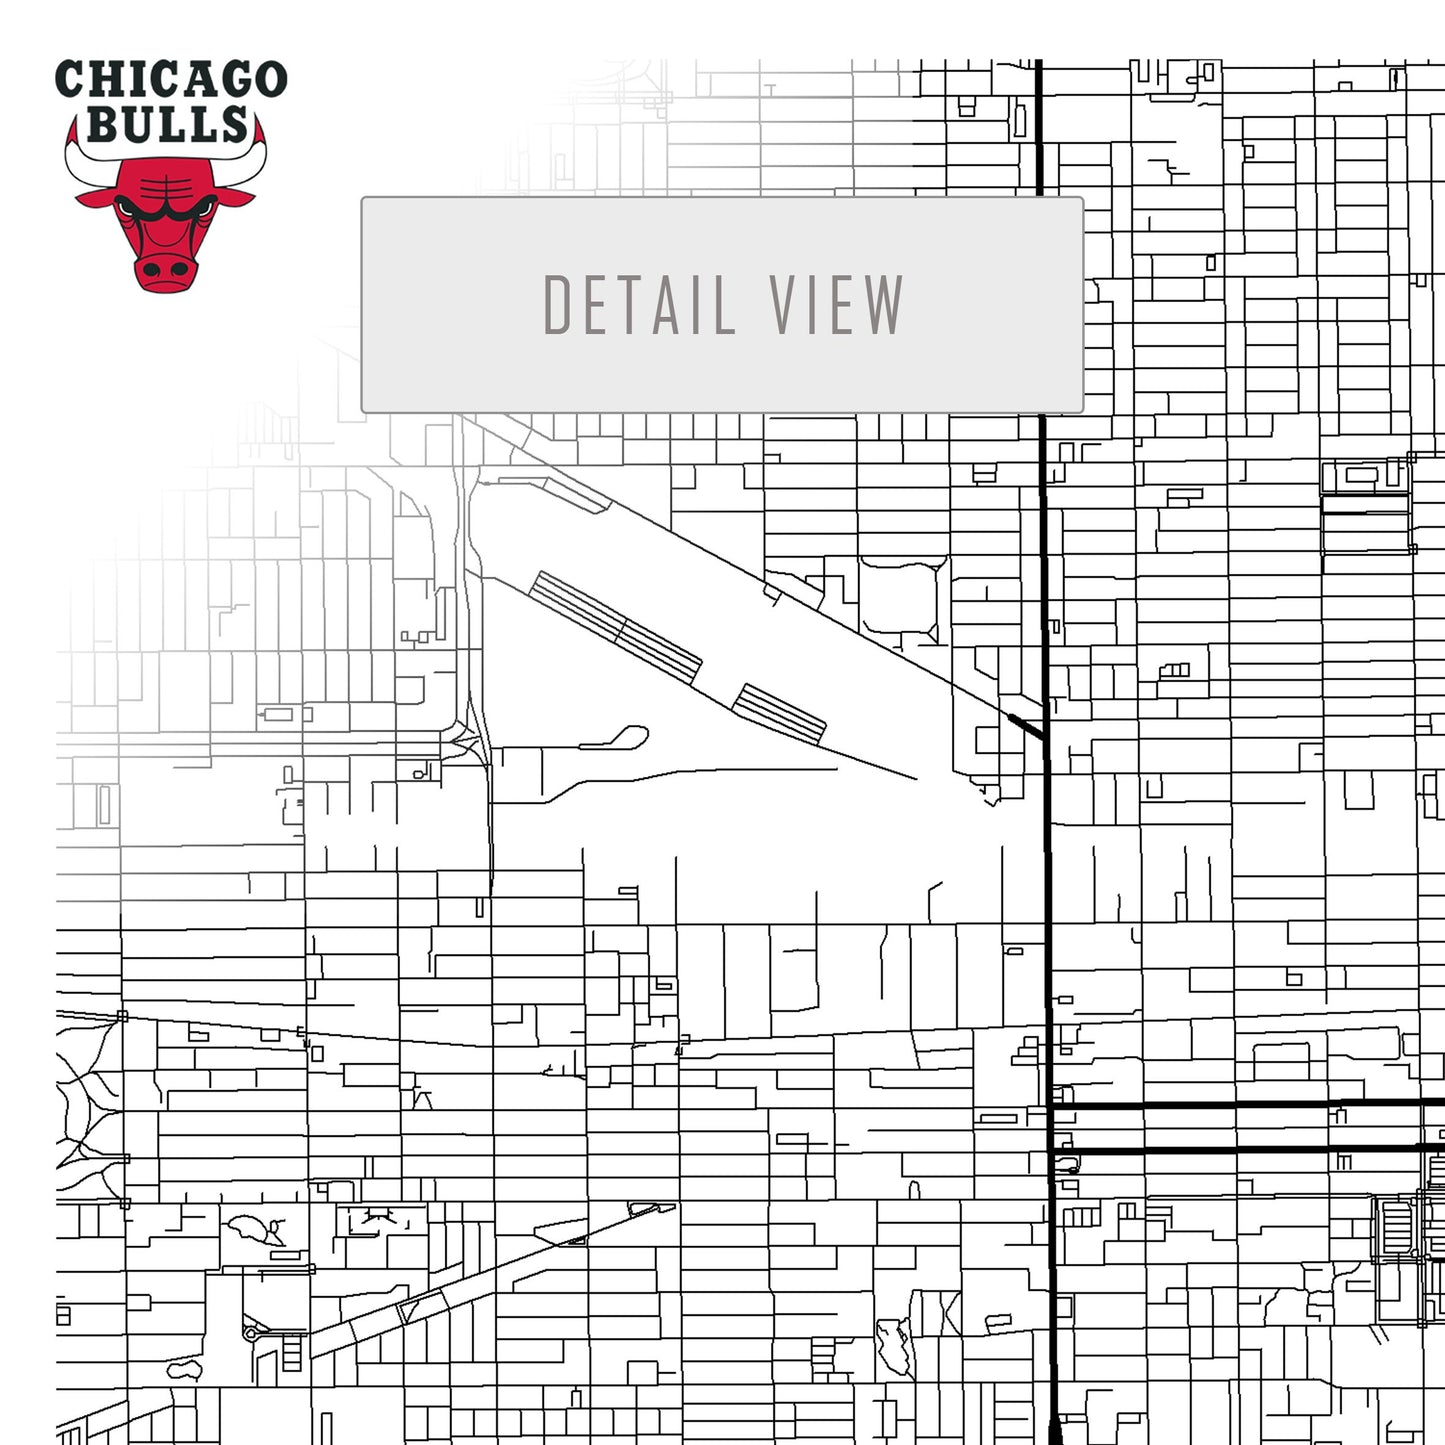 City map of CHICAGO - United Center - Home Decor Chicago - United Center wall decor - Chicago poster - United Center gift - Print map